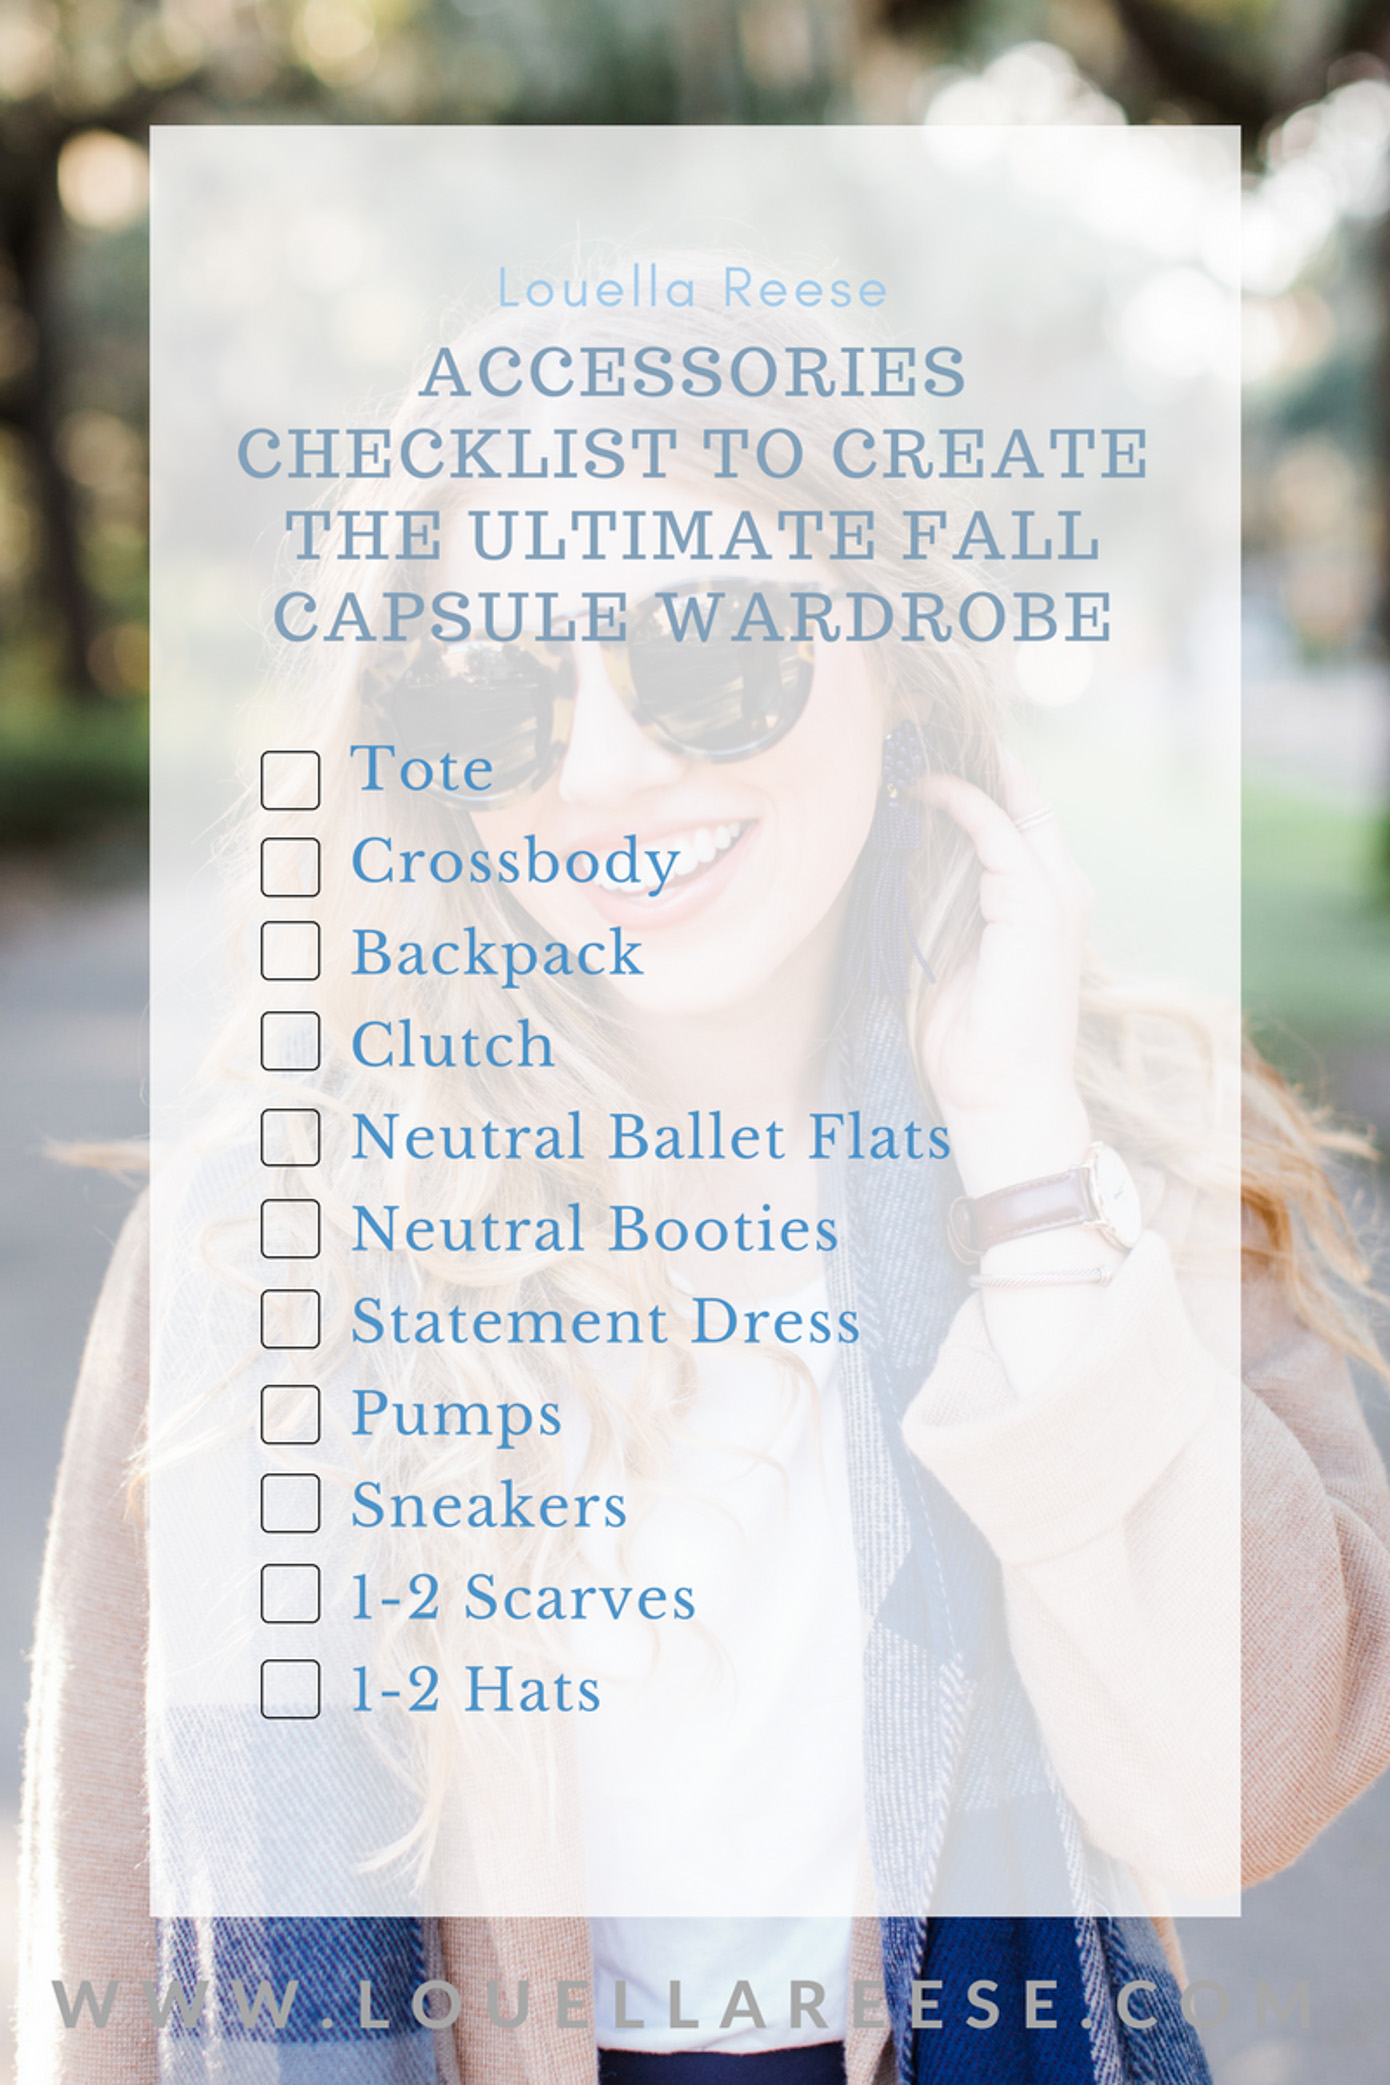 How to Build a Fall Capsule Wardrobe | Fall Capsule Wardrobe Accessories Check List | Louella Reese Life & Style Blog